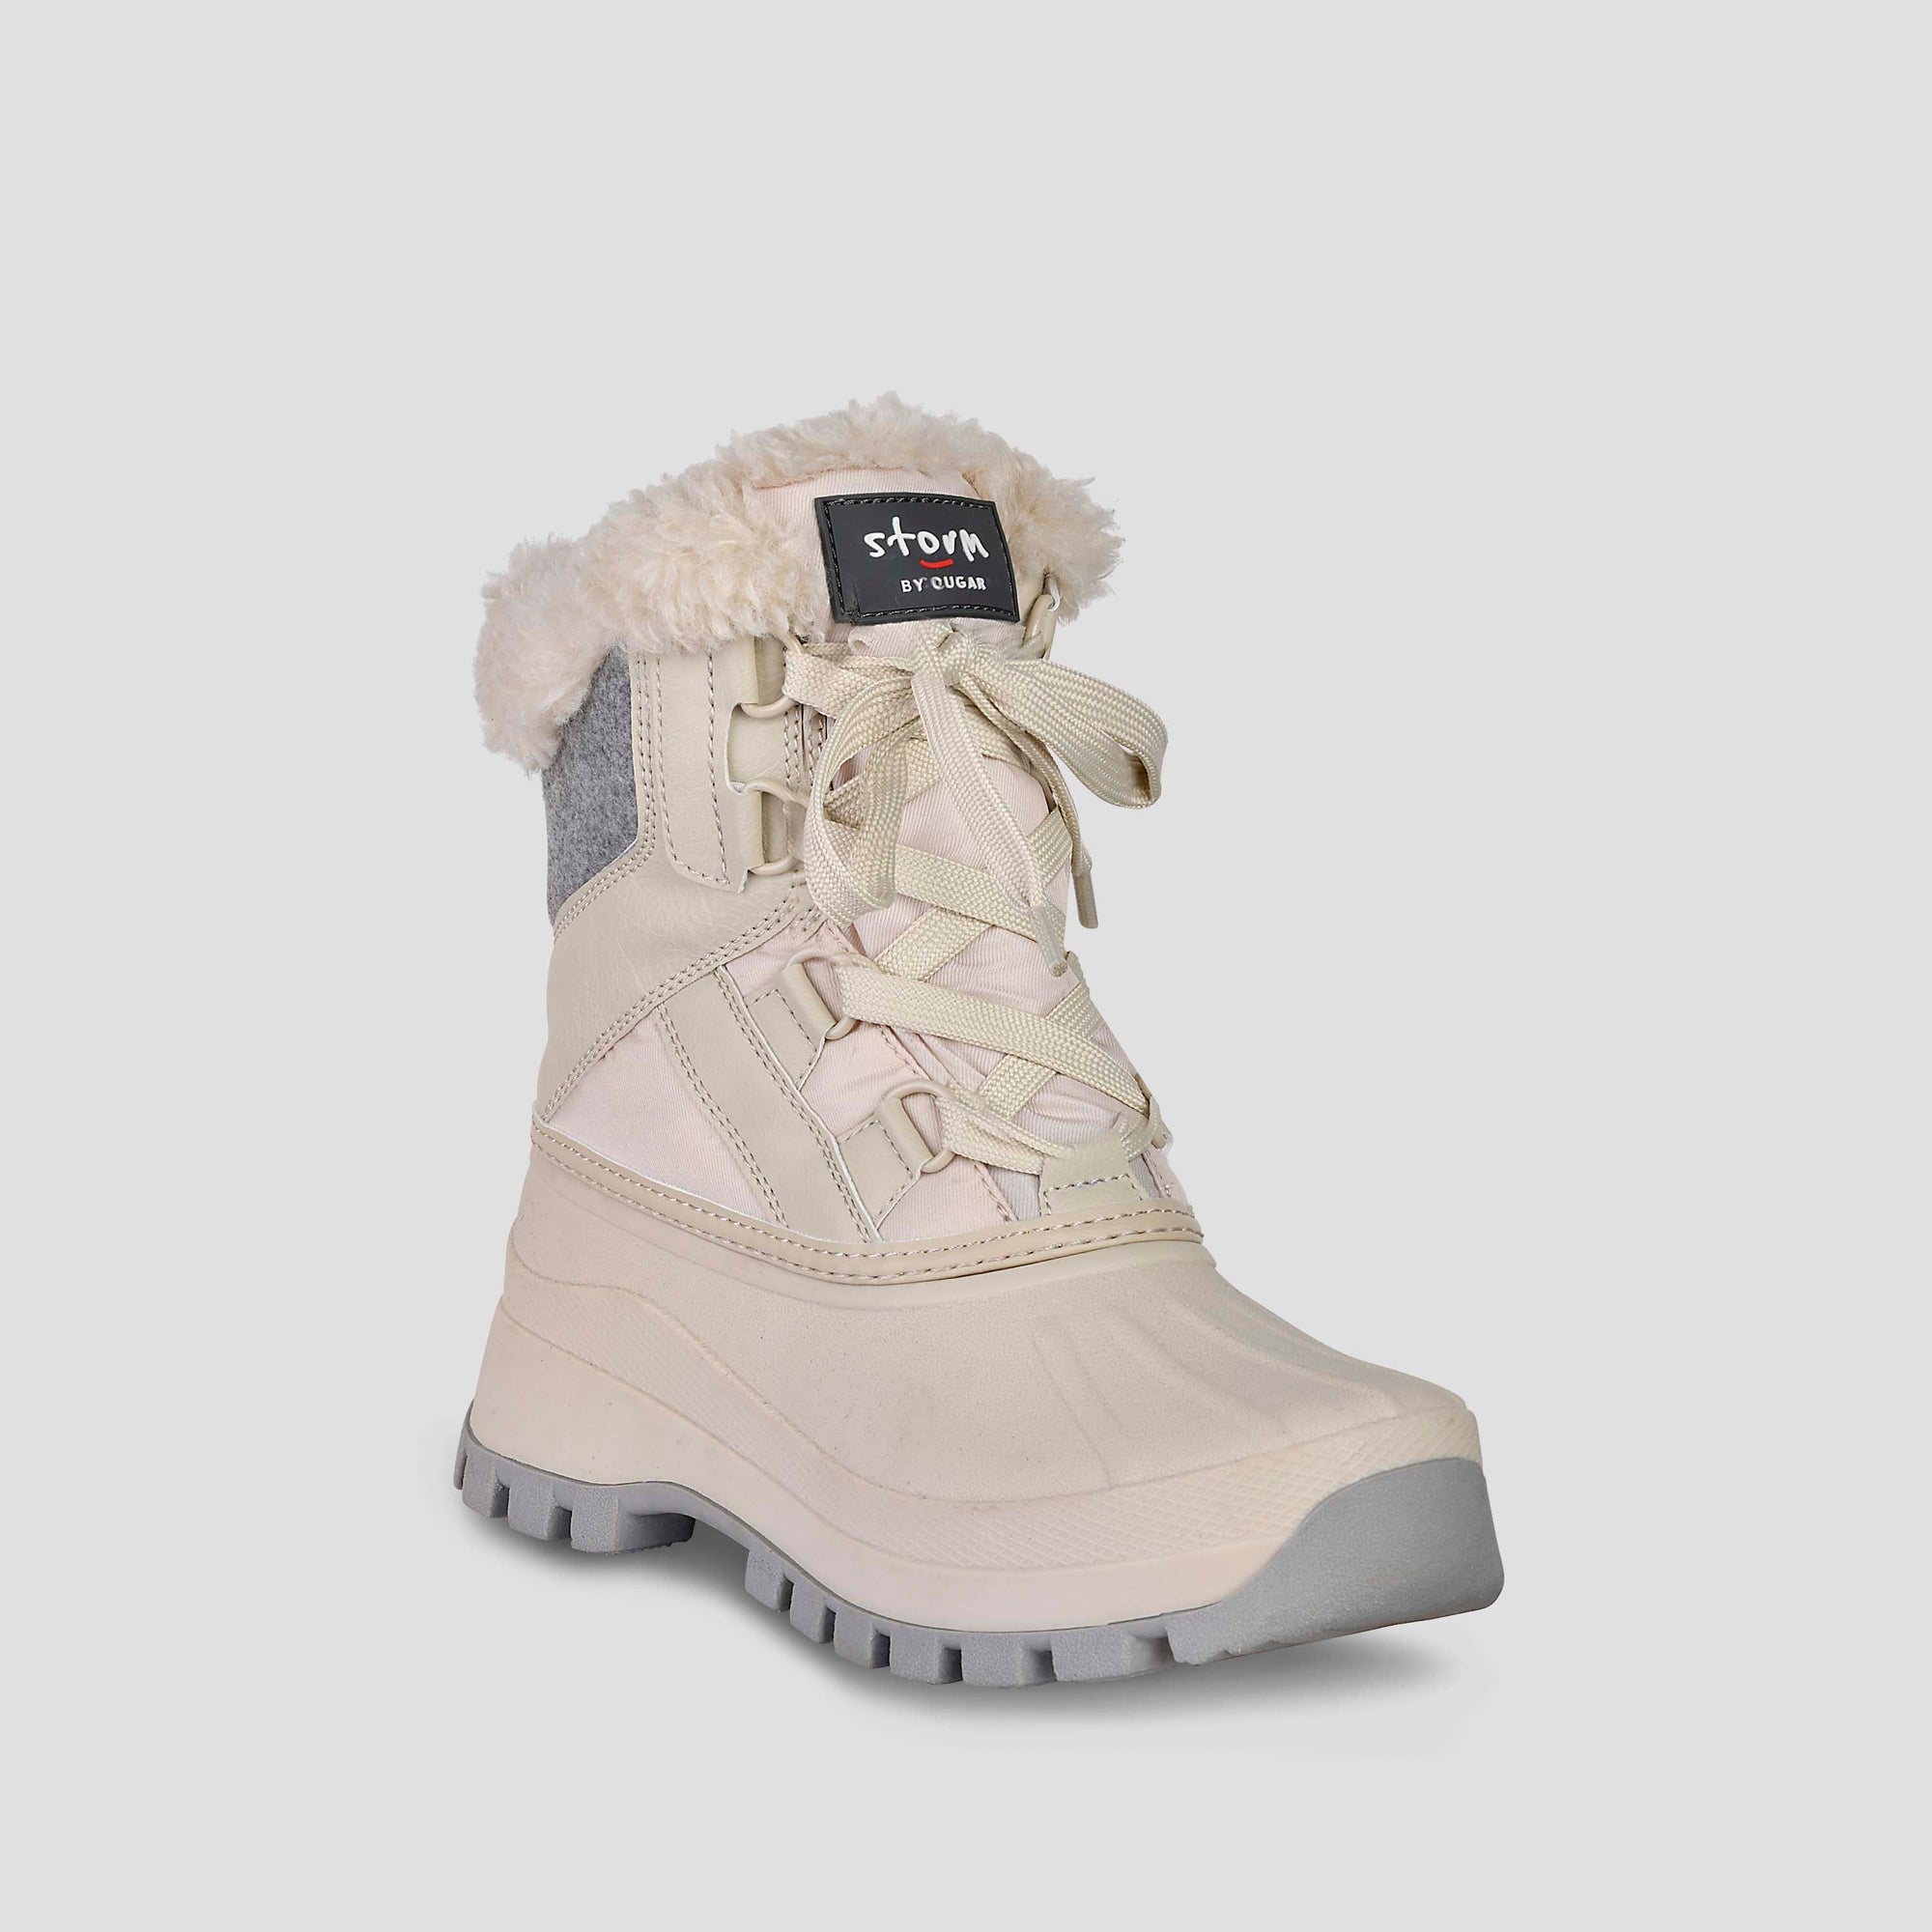 Fury Nylon Winter Boot - Color Oyster